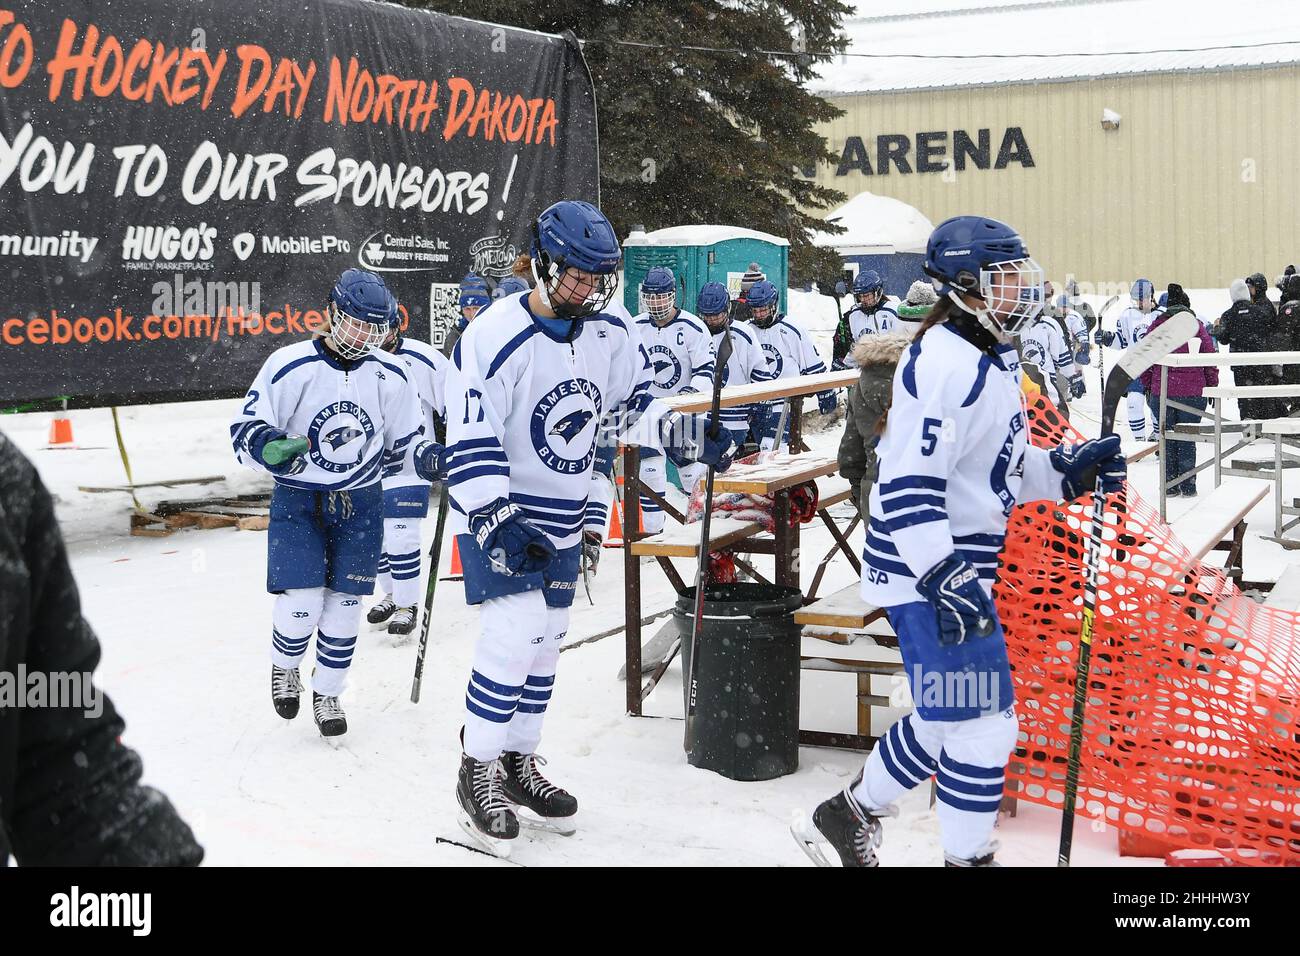 Jamestown Blue Jay girls hockey team players return to the ice during the 3rd annual Hockey Day North Dakota outdoor hockey event in Jamestown, ND. Youth, high school and college hockey teams from around North Dakota competed over two days. By Russell Hons/CSM Stock Photo